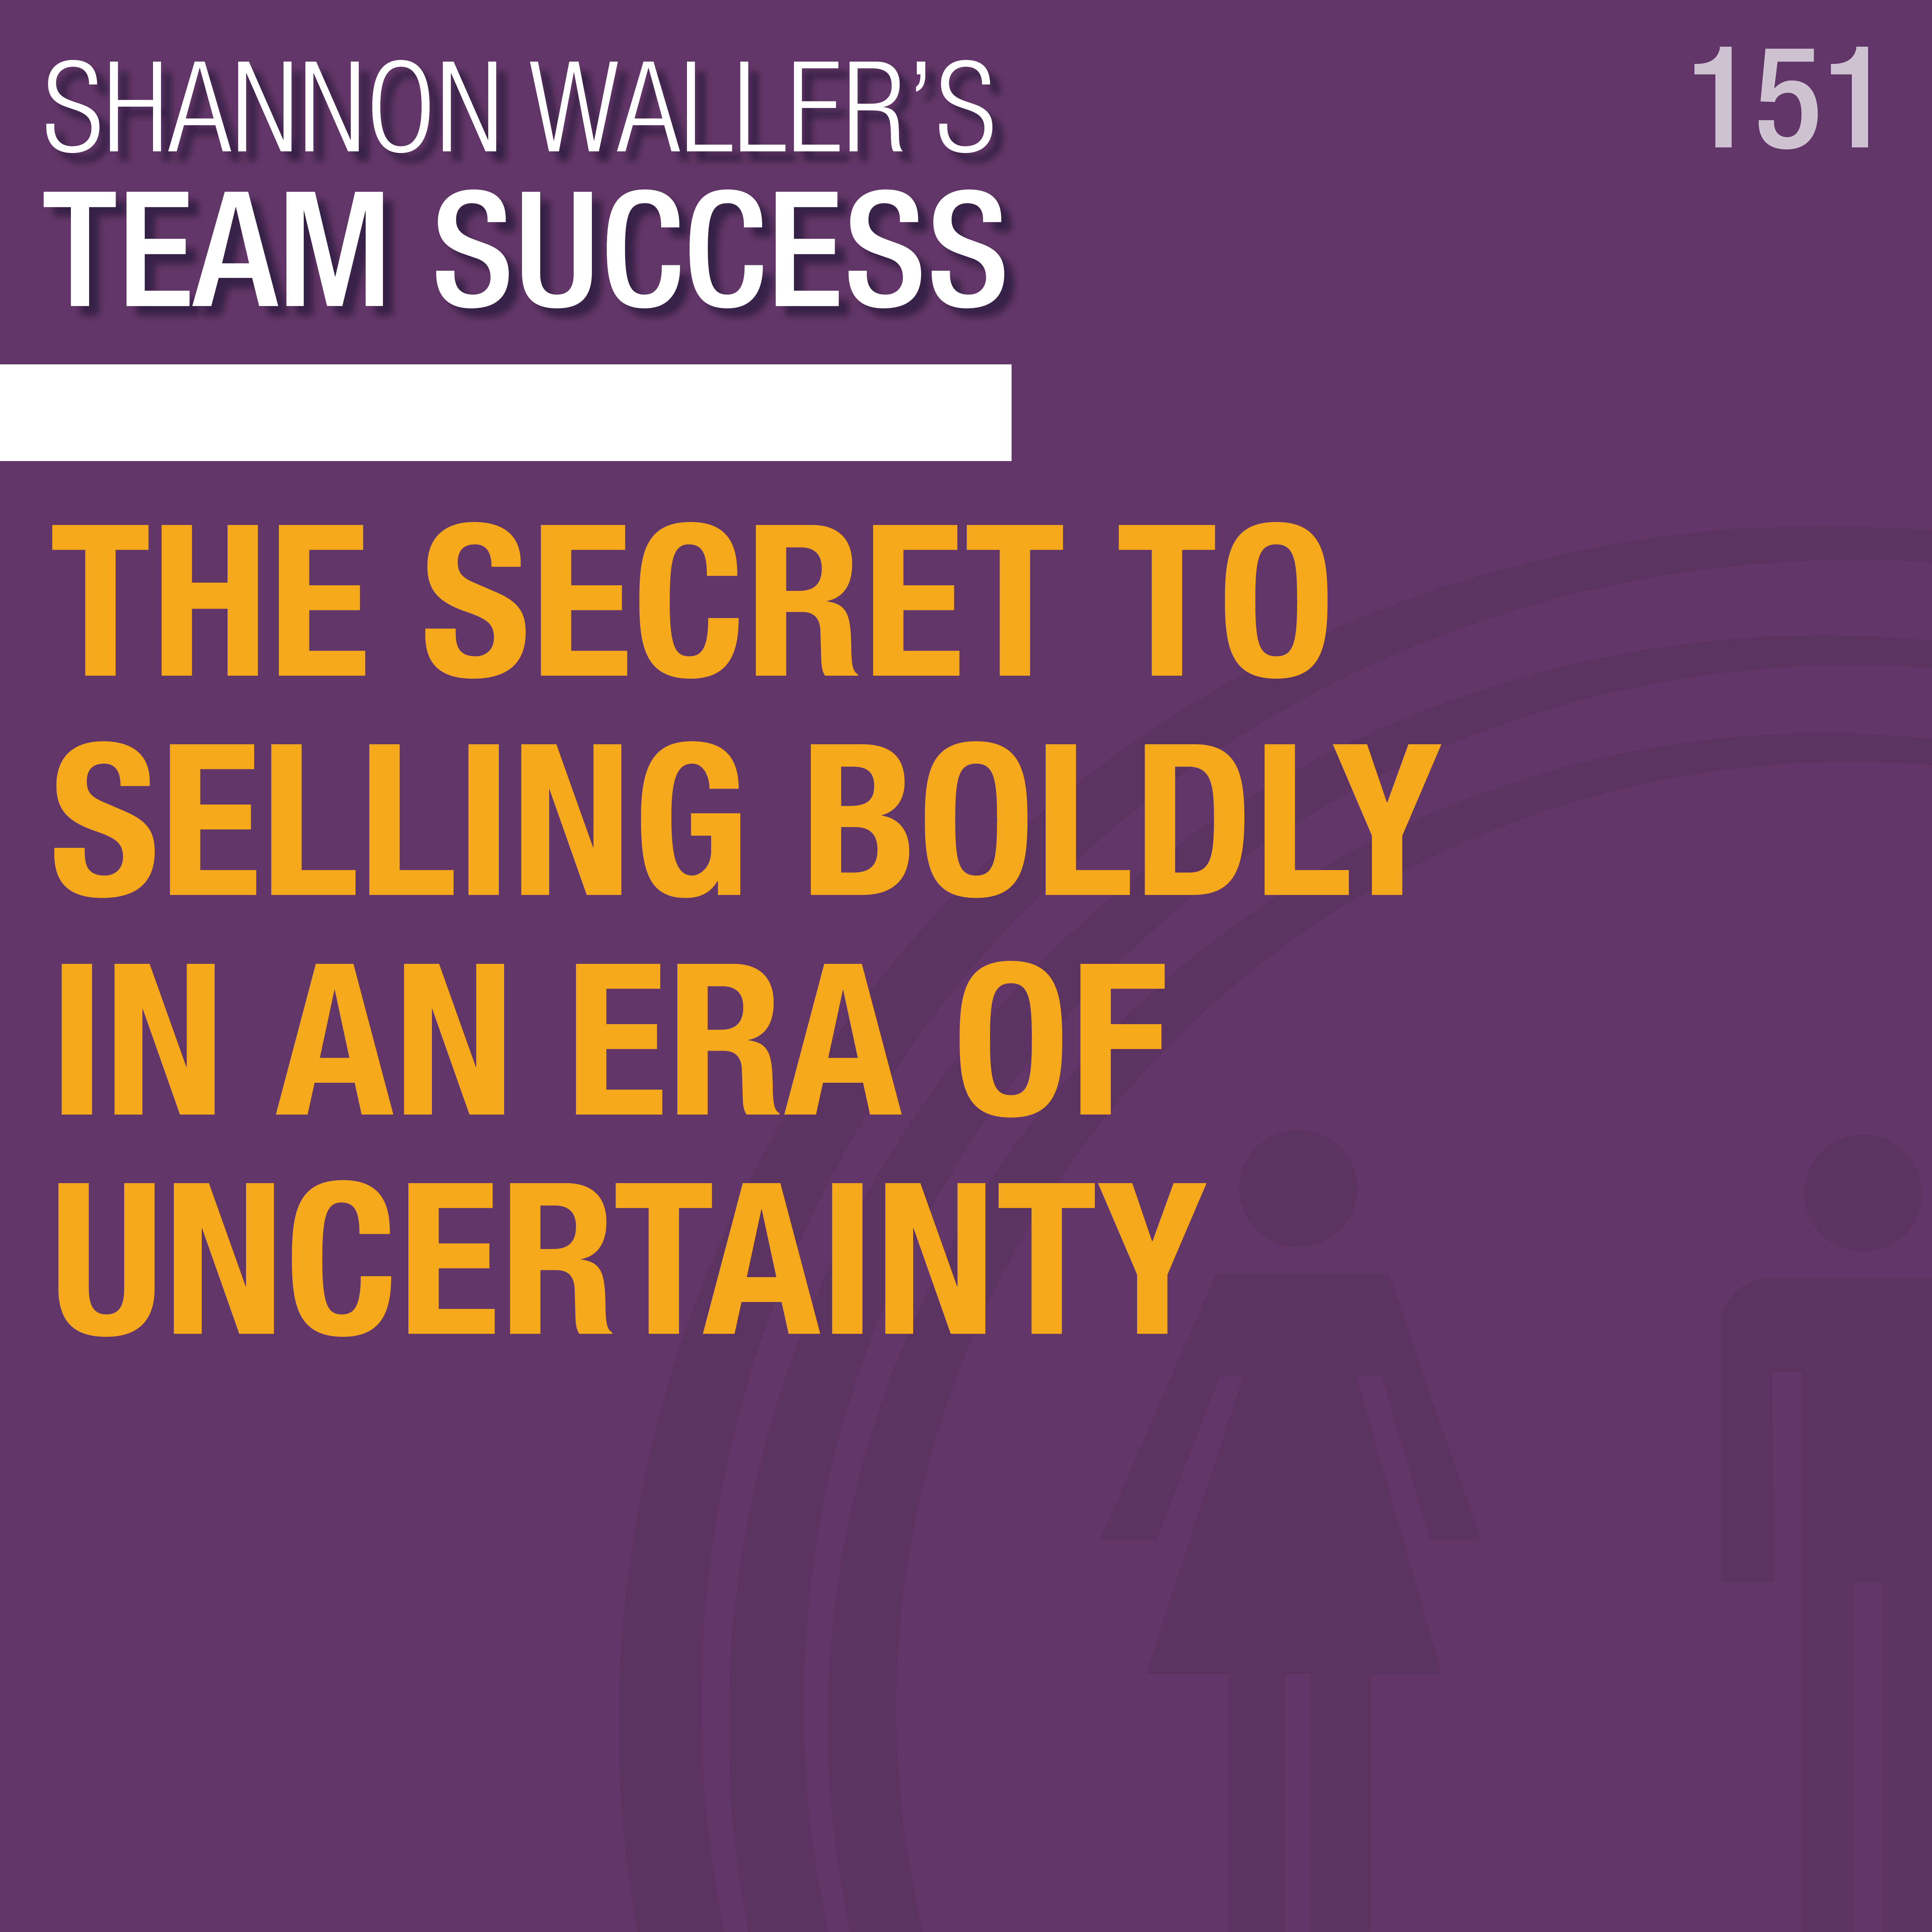 The Secret To Selling Boldly In An Era Of Uncertainty